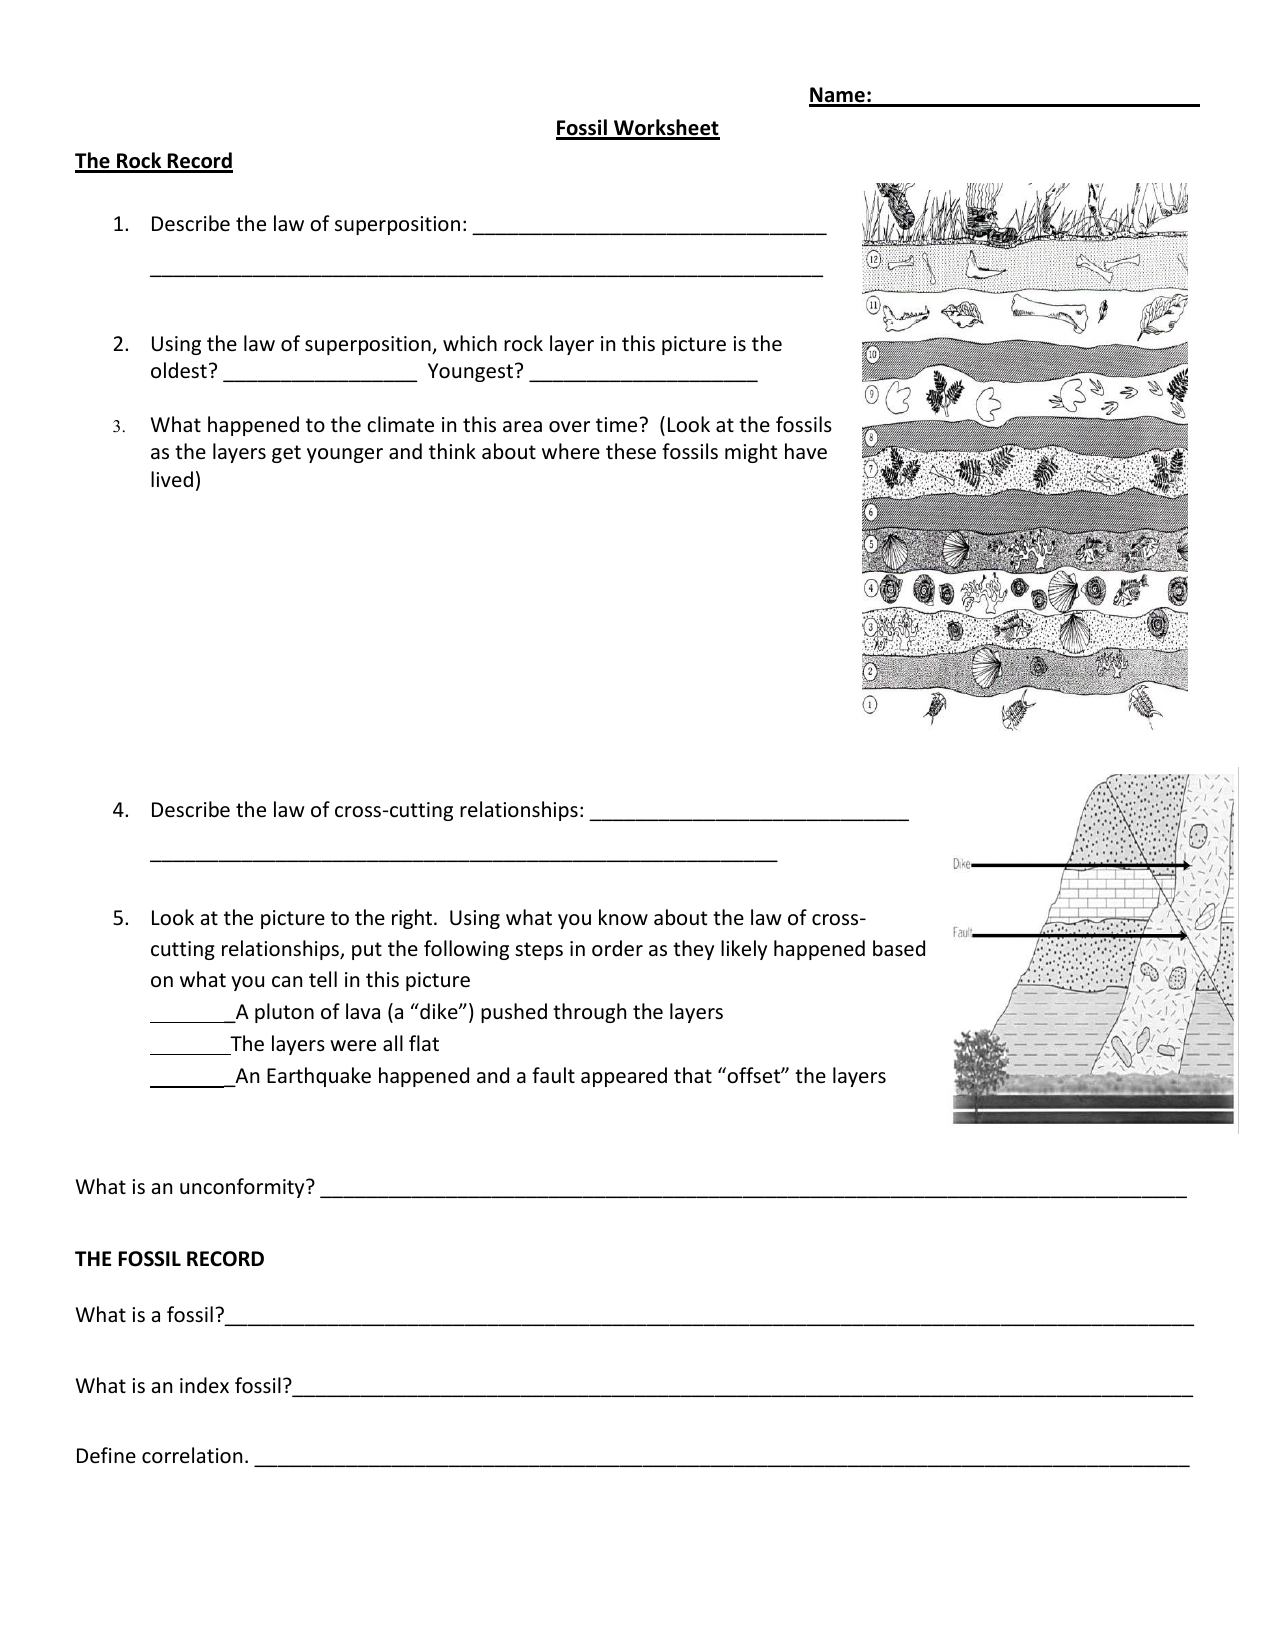 Name Fossil Worksheet The Rock Record 1 Along With Fossil Formation Worksheet